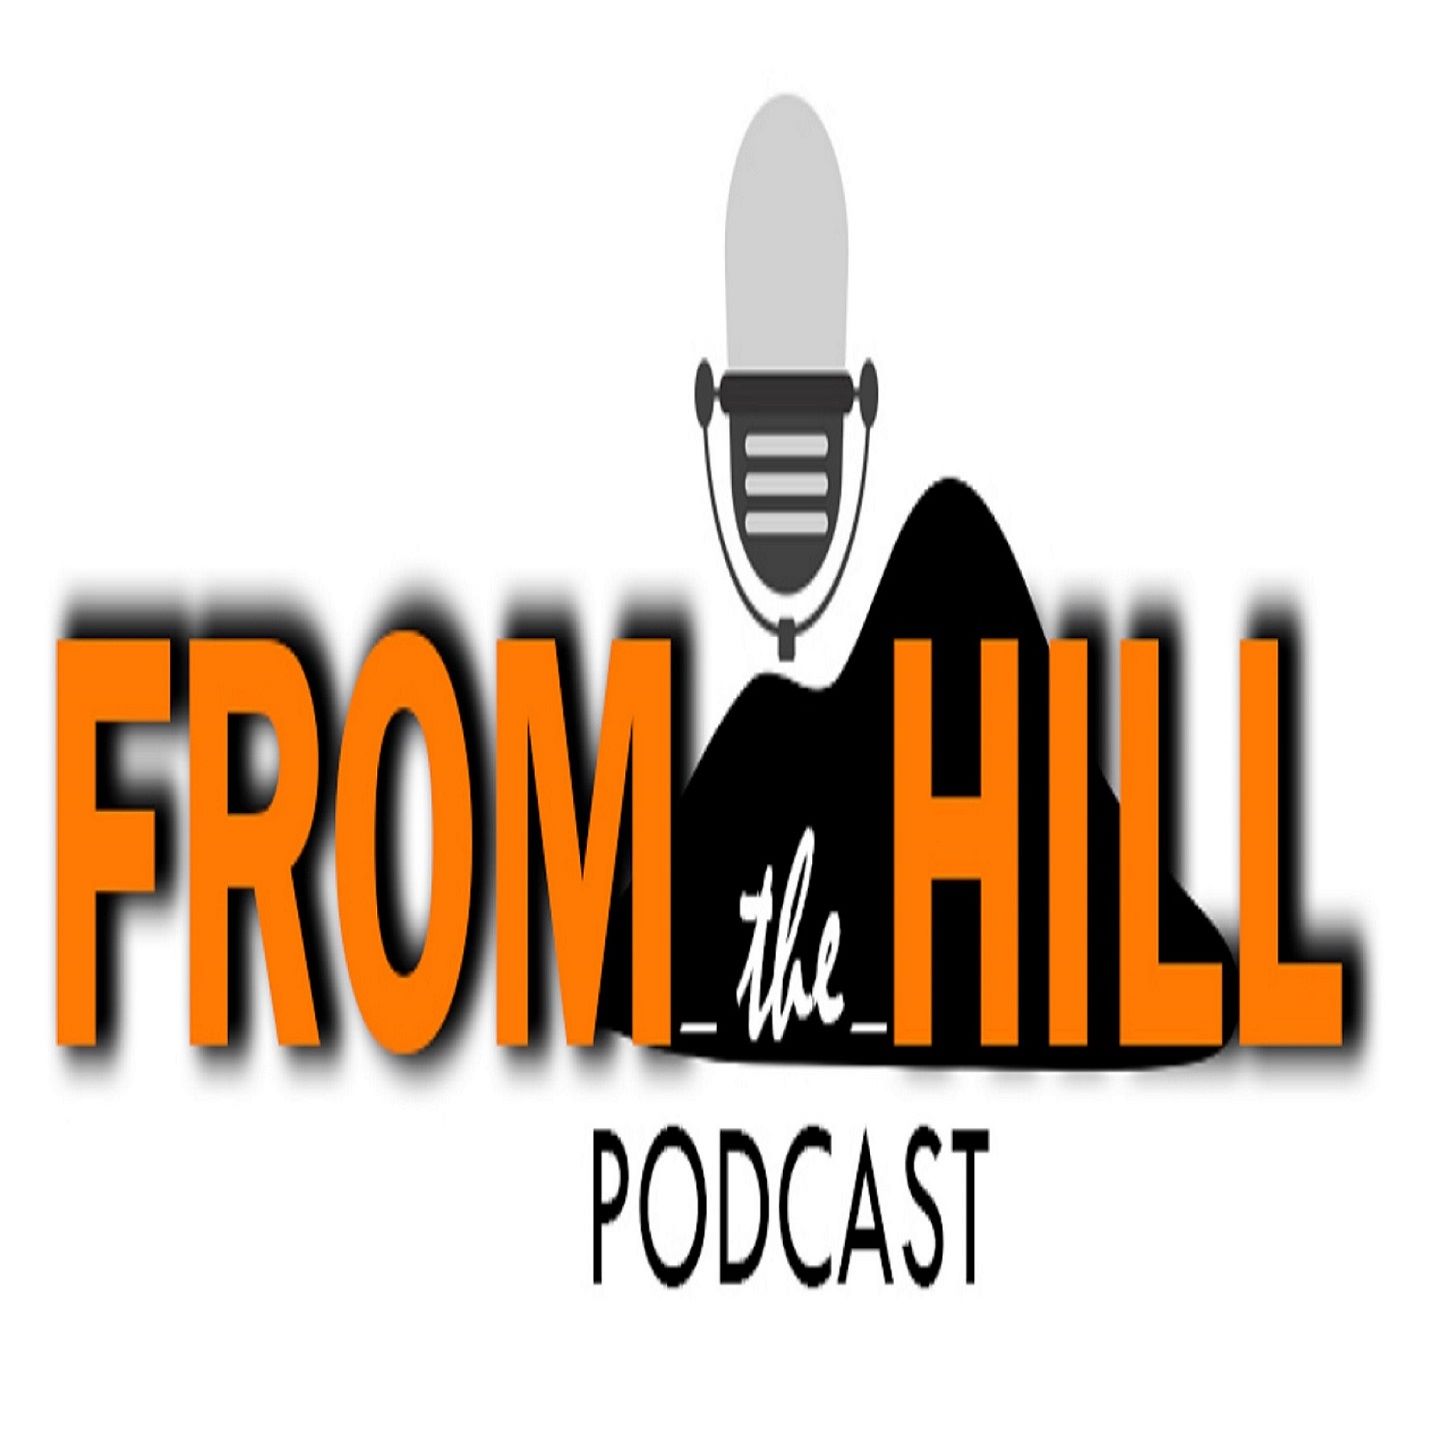 From_The_Hill Podcast